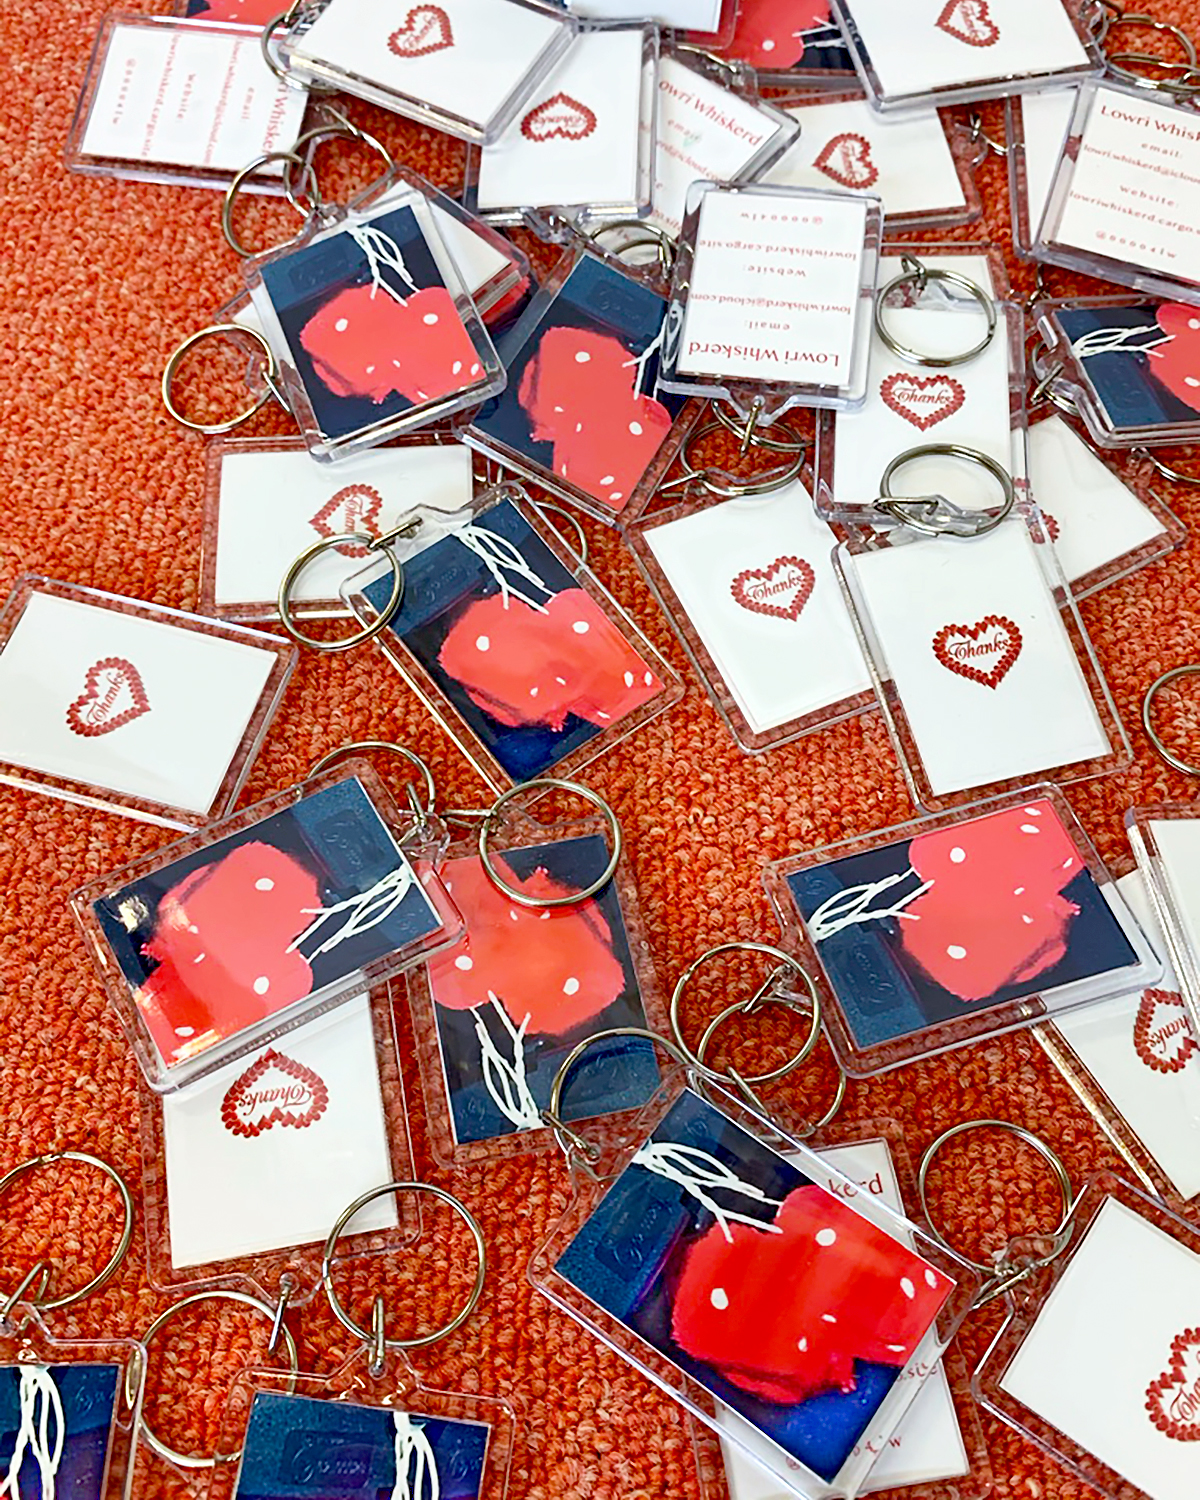 Several keyrings containing images of love-hearts are scattered across a red carpet. 